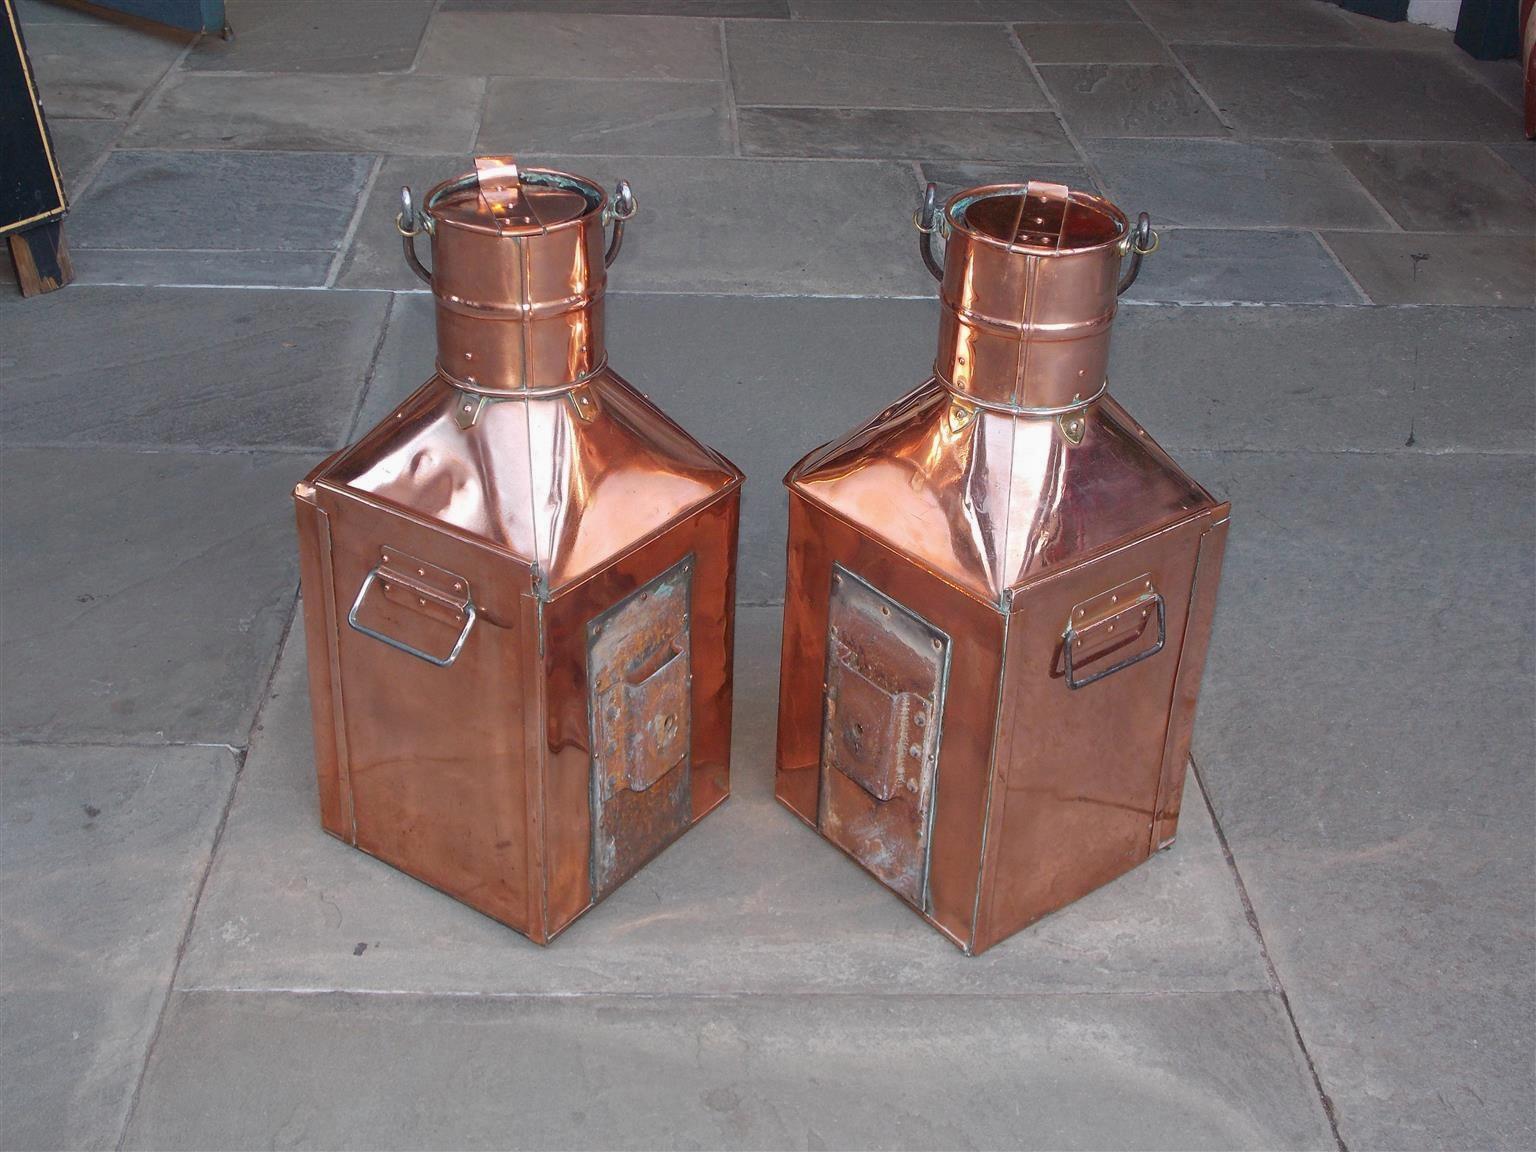 Cast Pair of English Nautical Copper & Brass Ship Lanterns, Griffiths & Sons. C. 1880